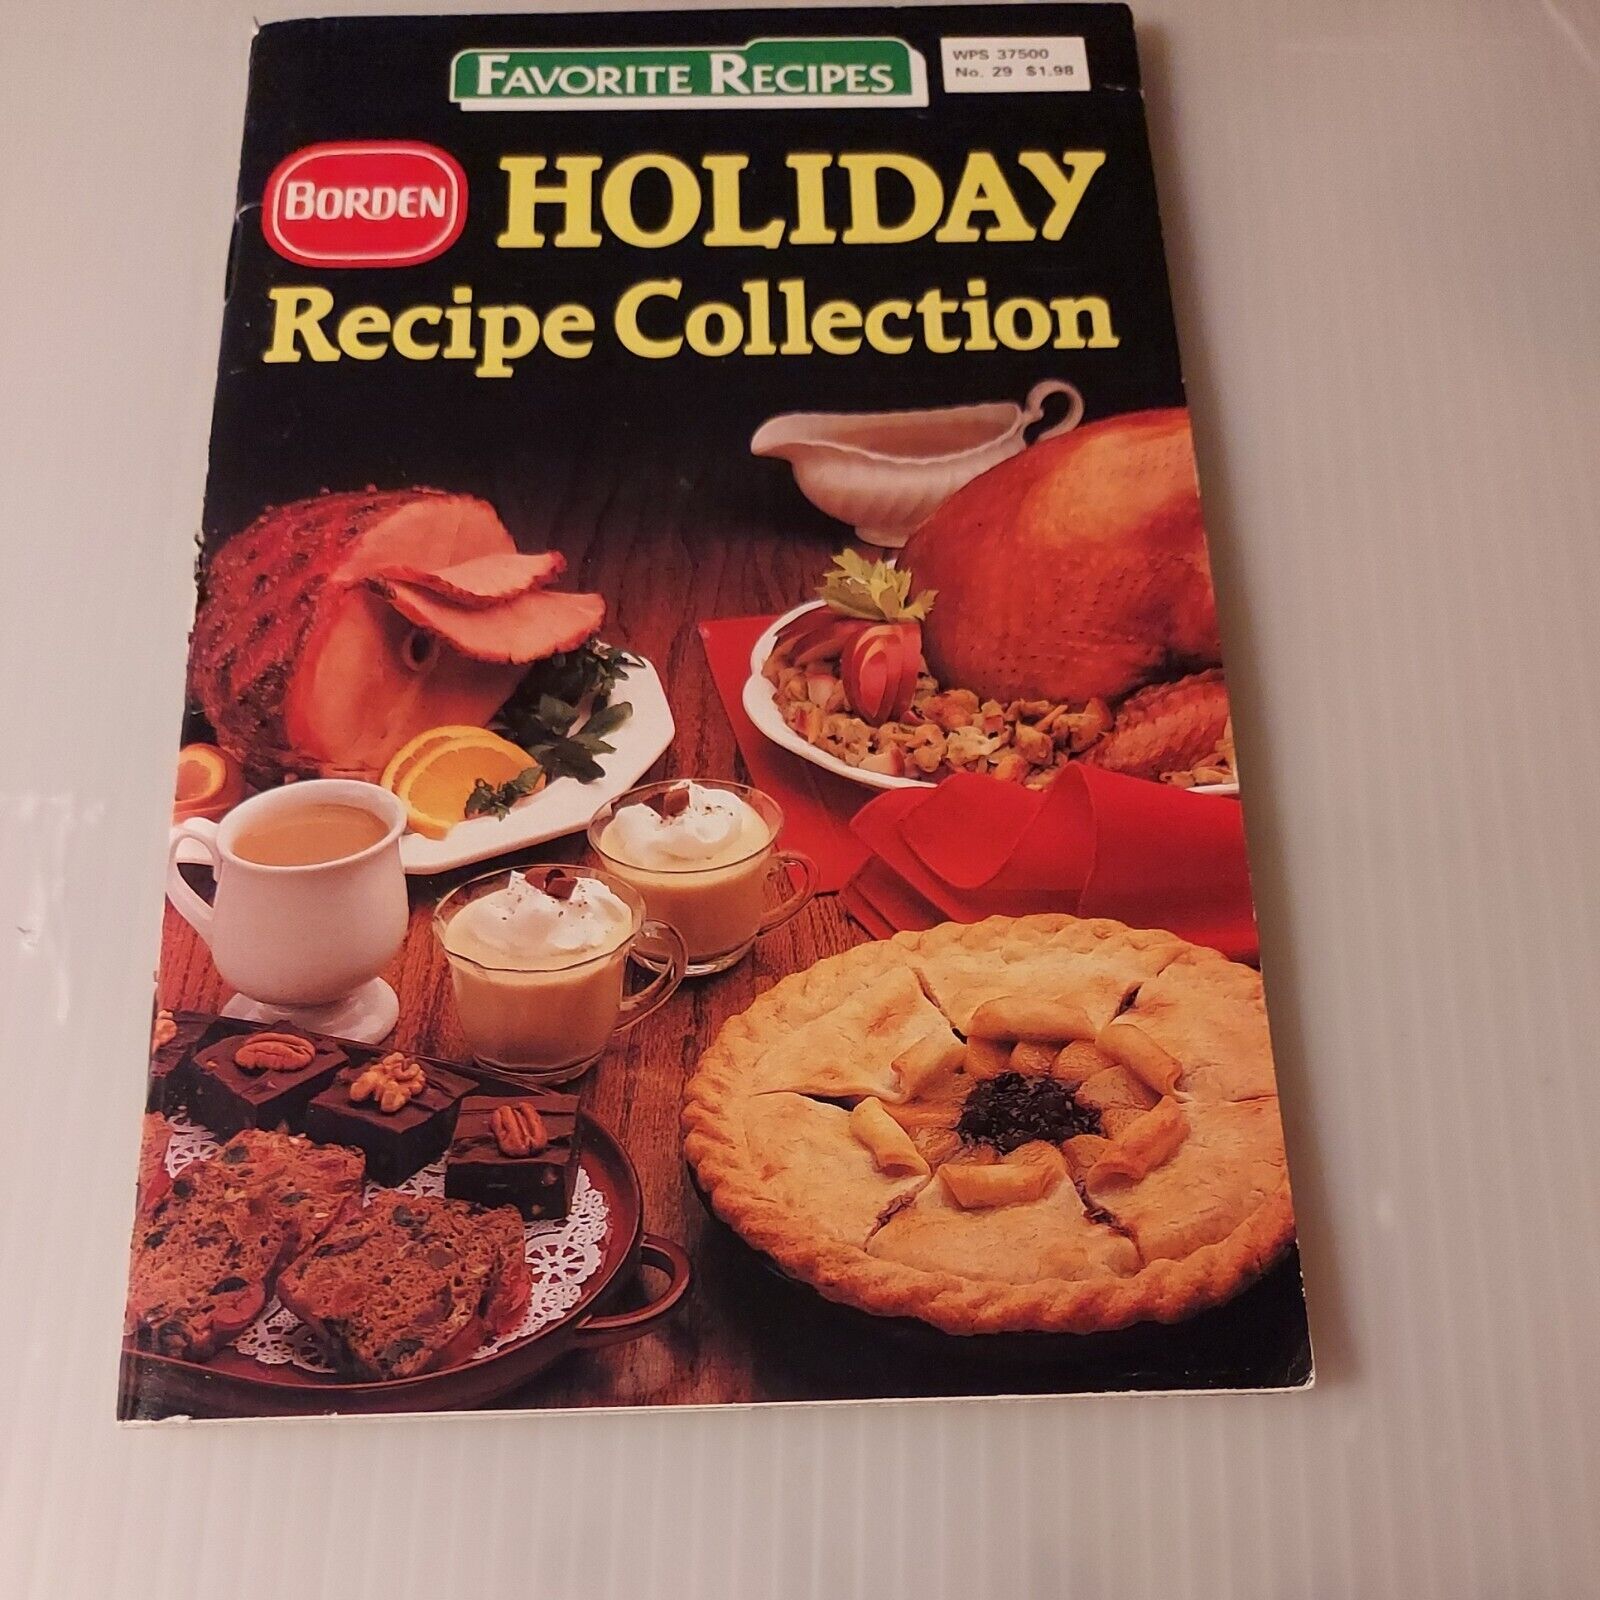 1987, Favorite Recipes Booklet, Holiday Recipe Collection By Borden #29